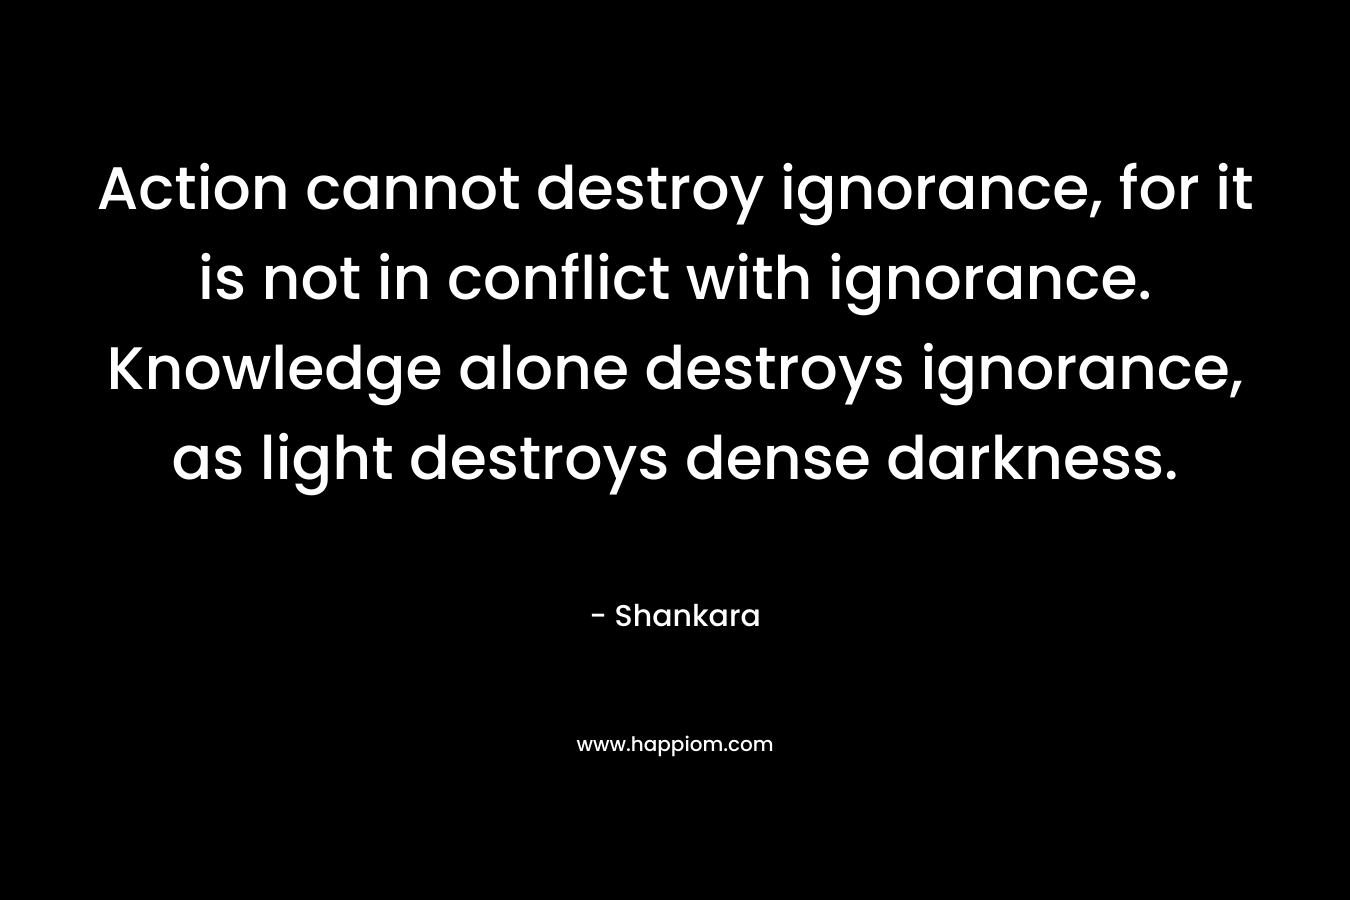 Action cannot destroy ignorance, for it is not in conflict with ignorance. Knowledge alone destroys ignorance, as light destroys dense darkness. – Shankara